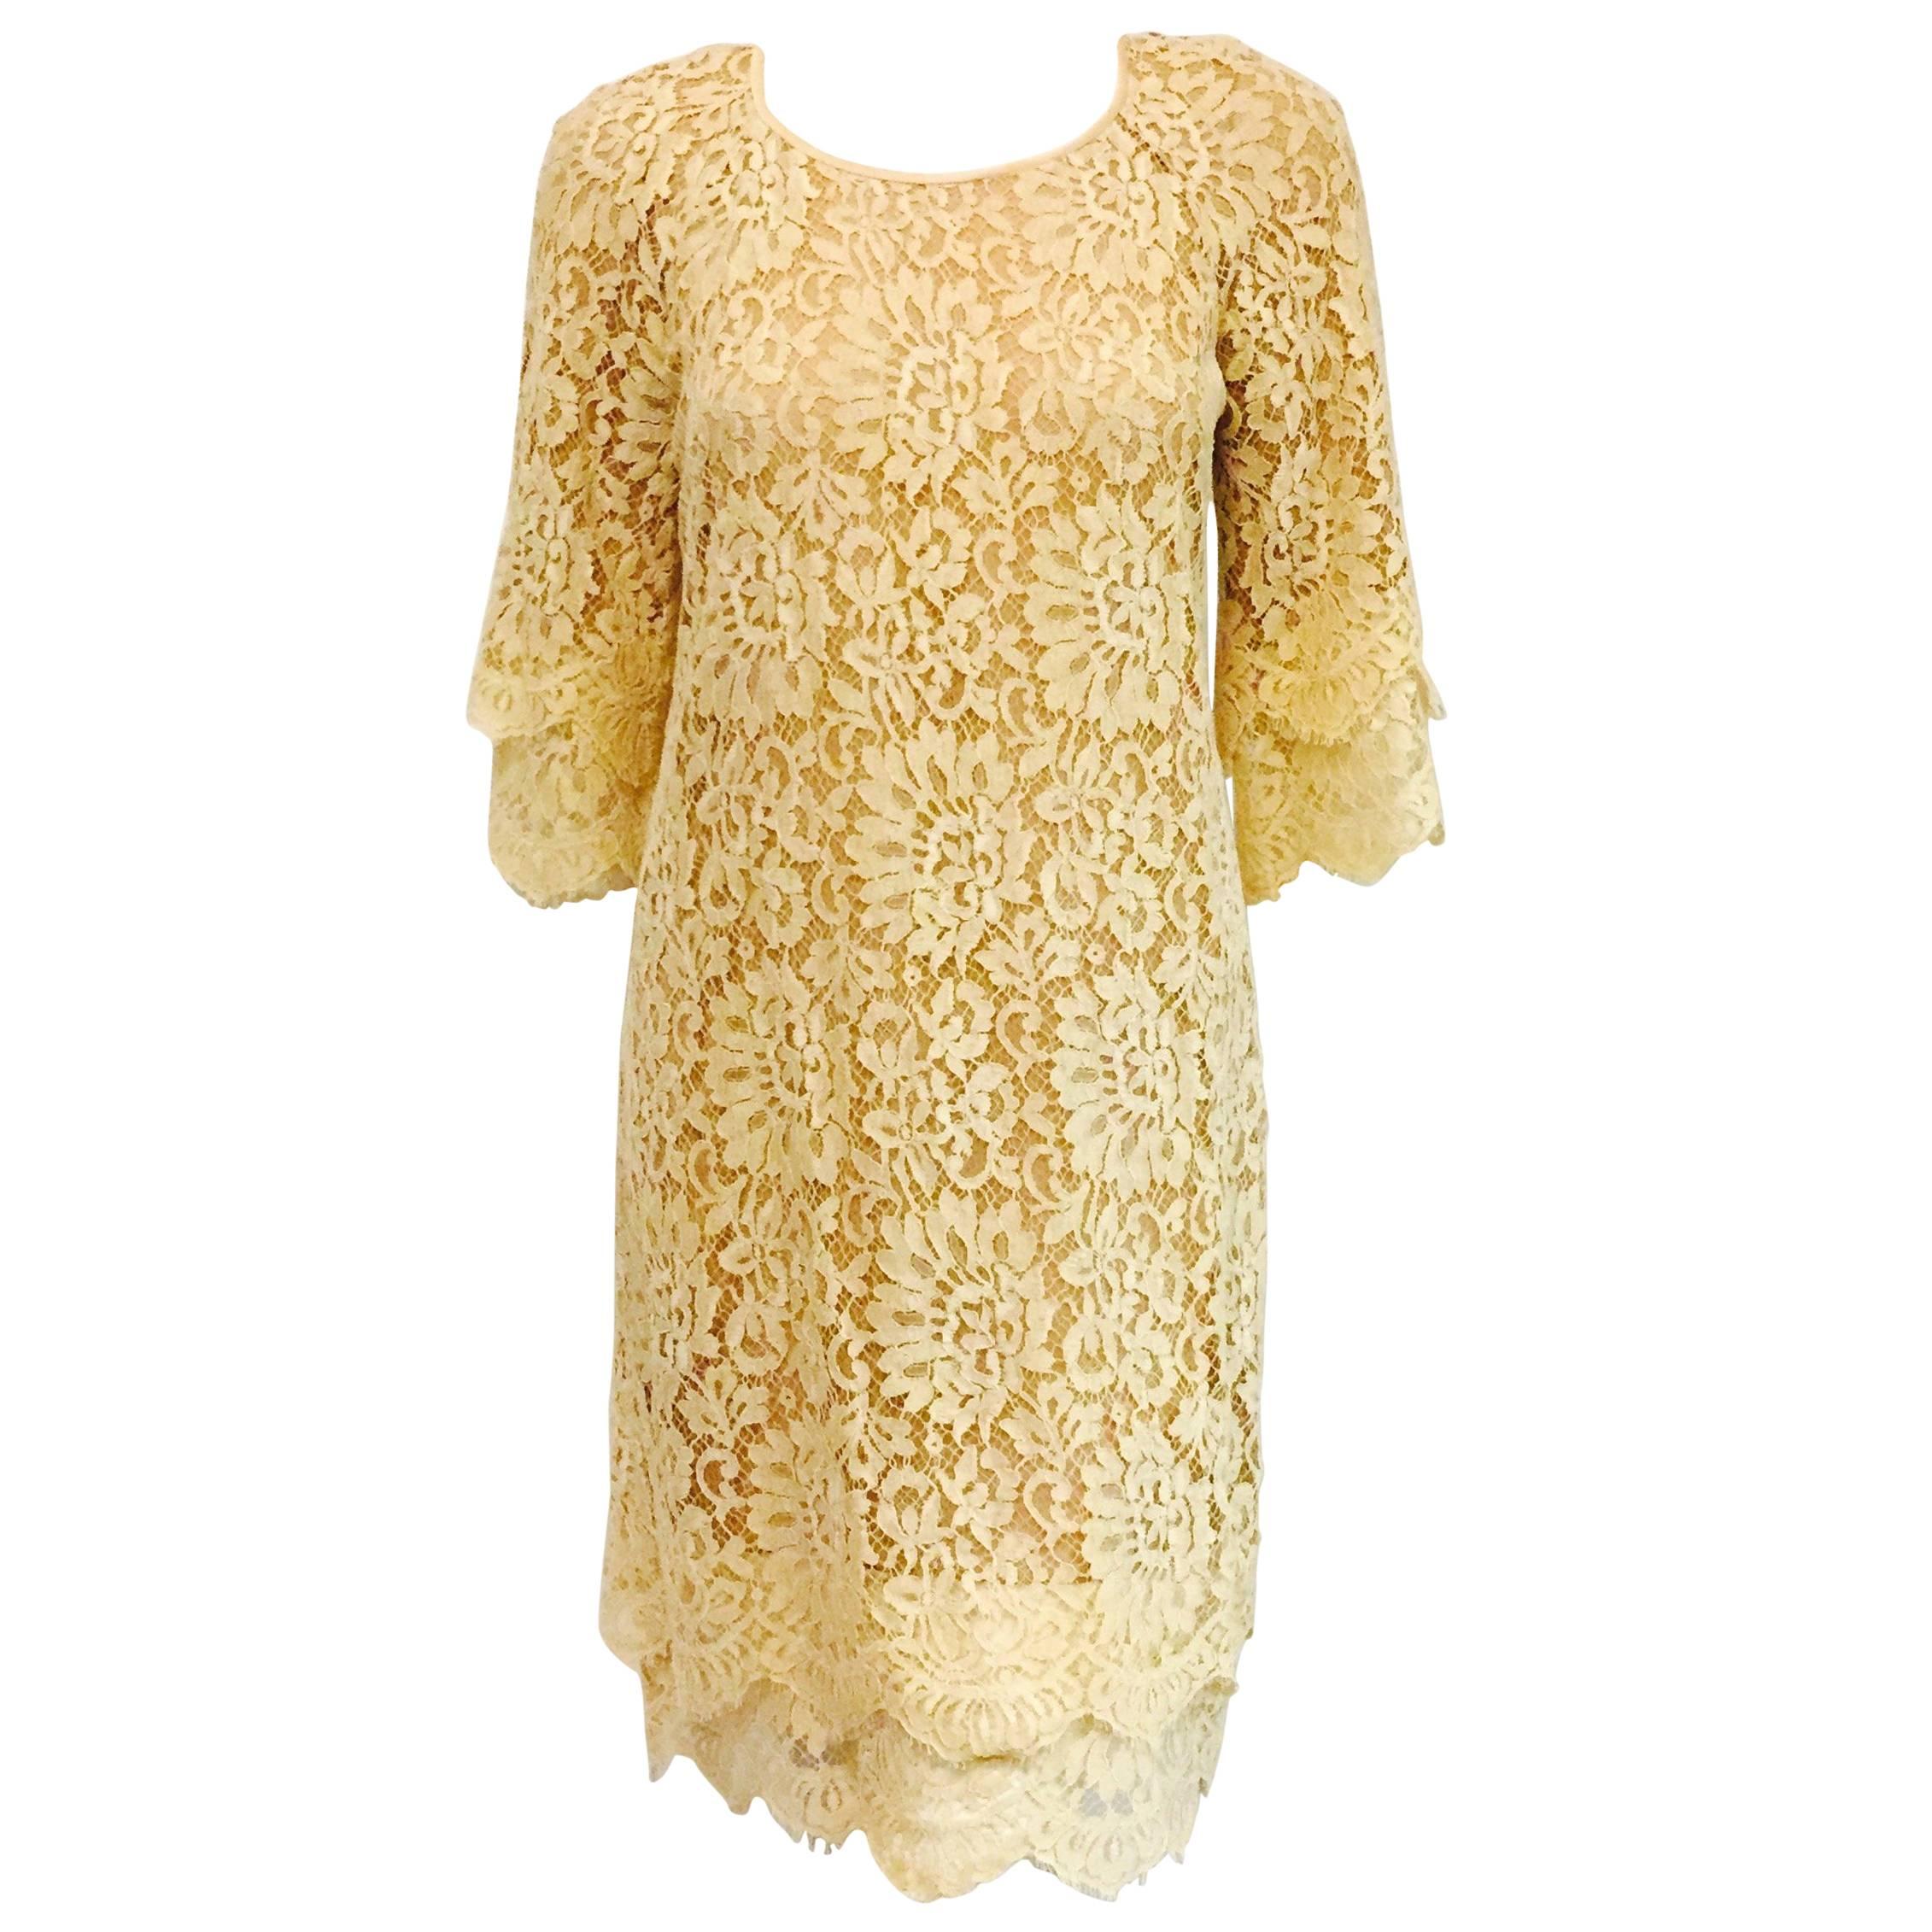 Modern Michael Kors Beige Lace Dress With Double Layer Cuffs and Hem For Sale